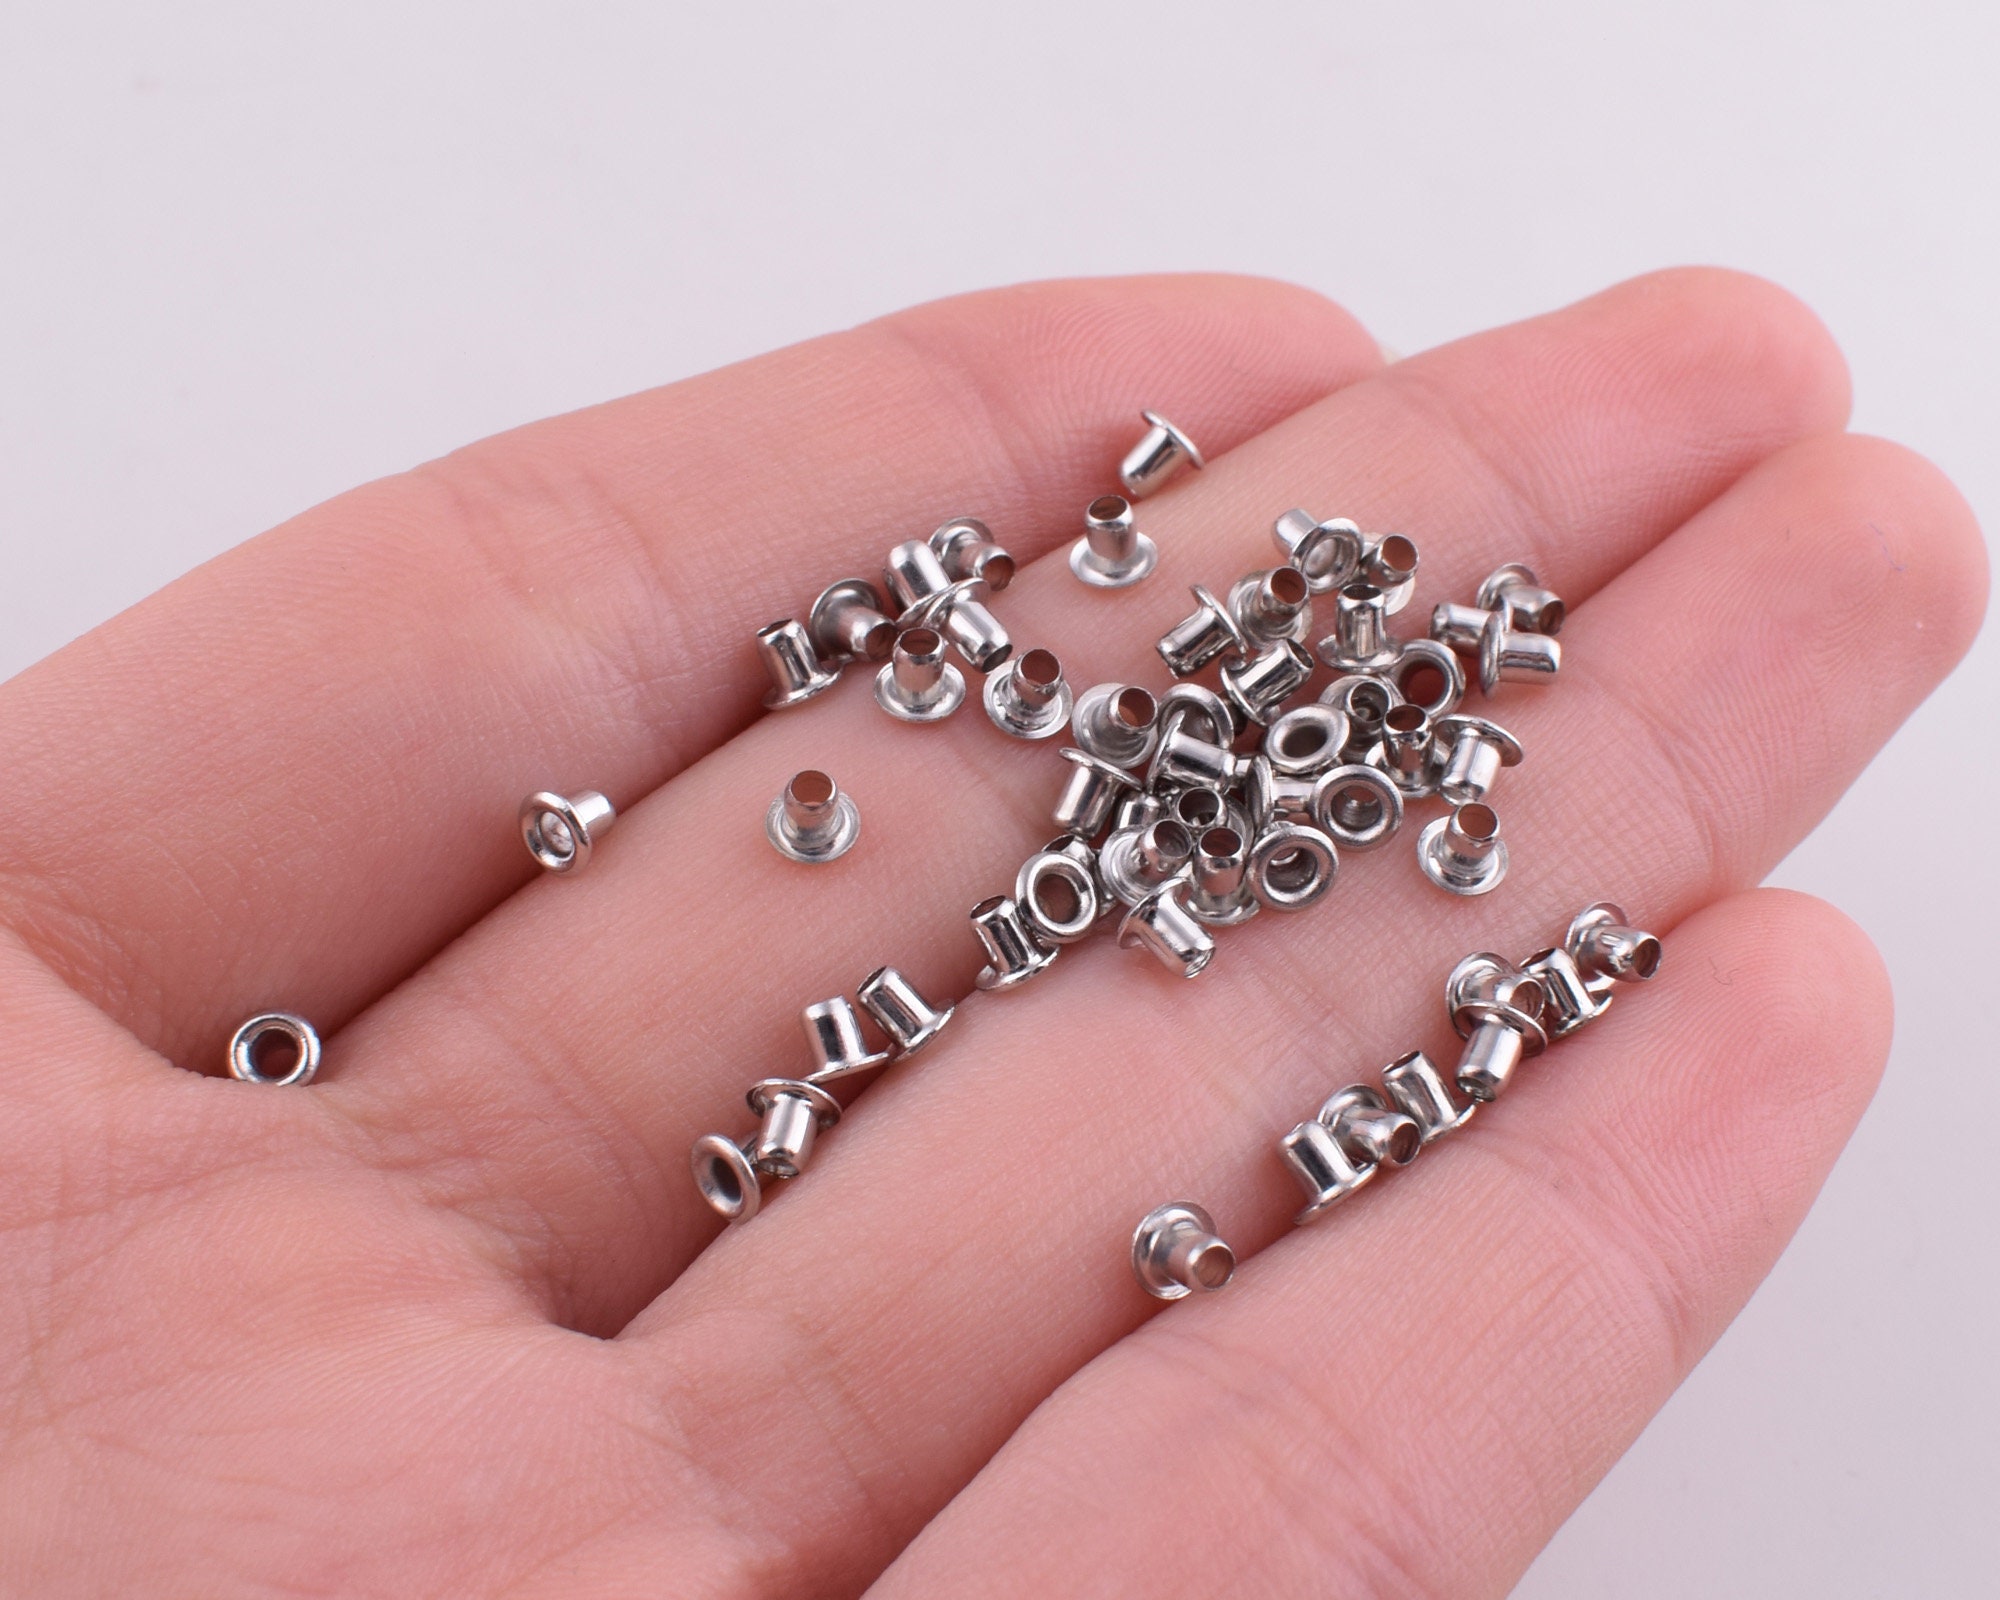 Hilitchi 200Pcs 1/2 Inch - 12mm Silver Thicken Grommet Eyelets Metal  Eyelets with Washers Assortment Kit, Hole Self Backing Eyelet for Bead  Cores